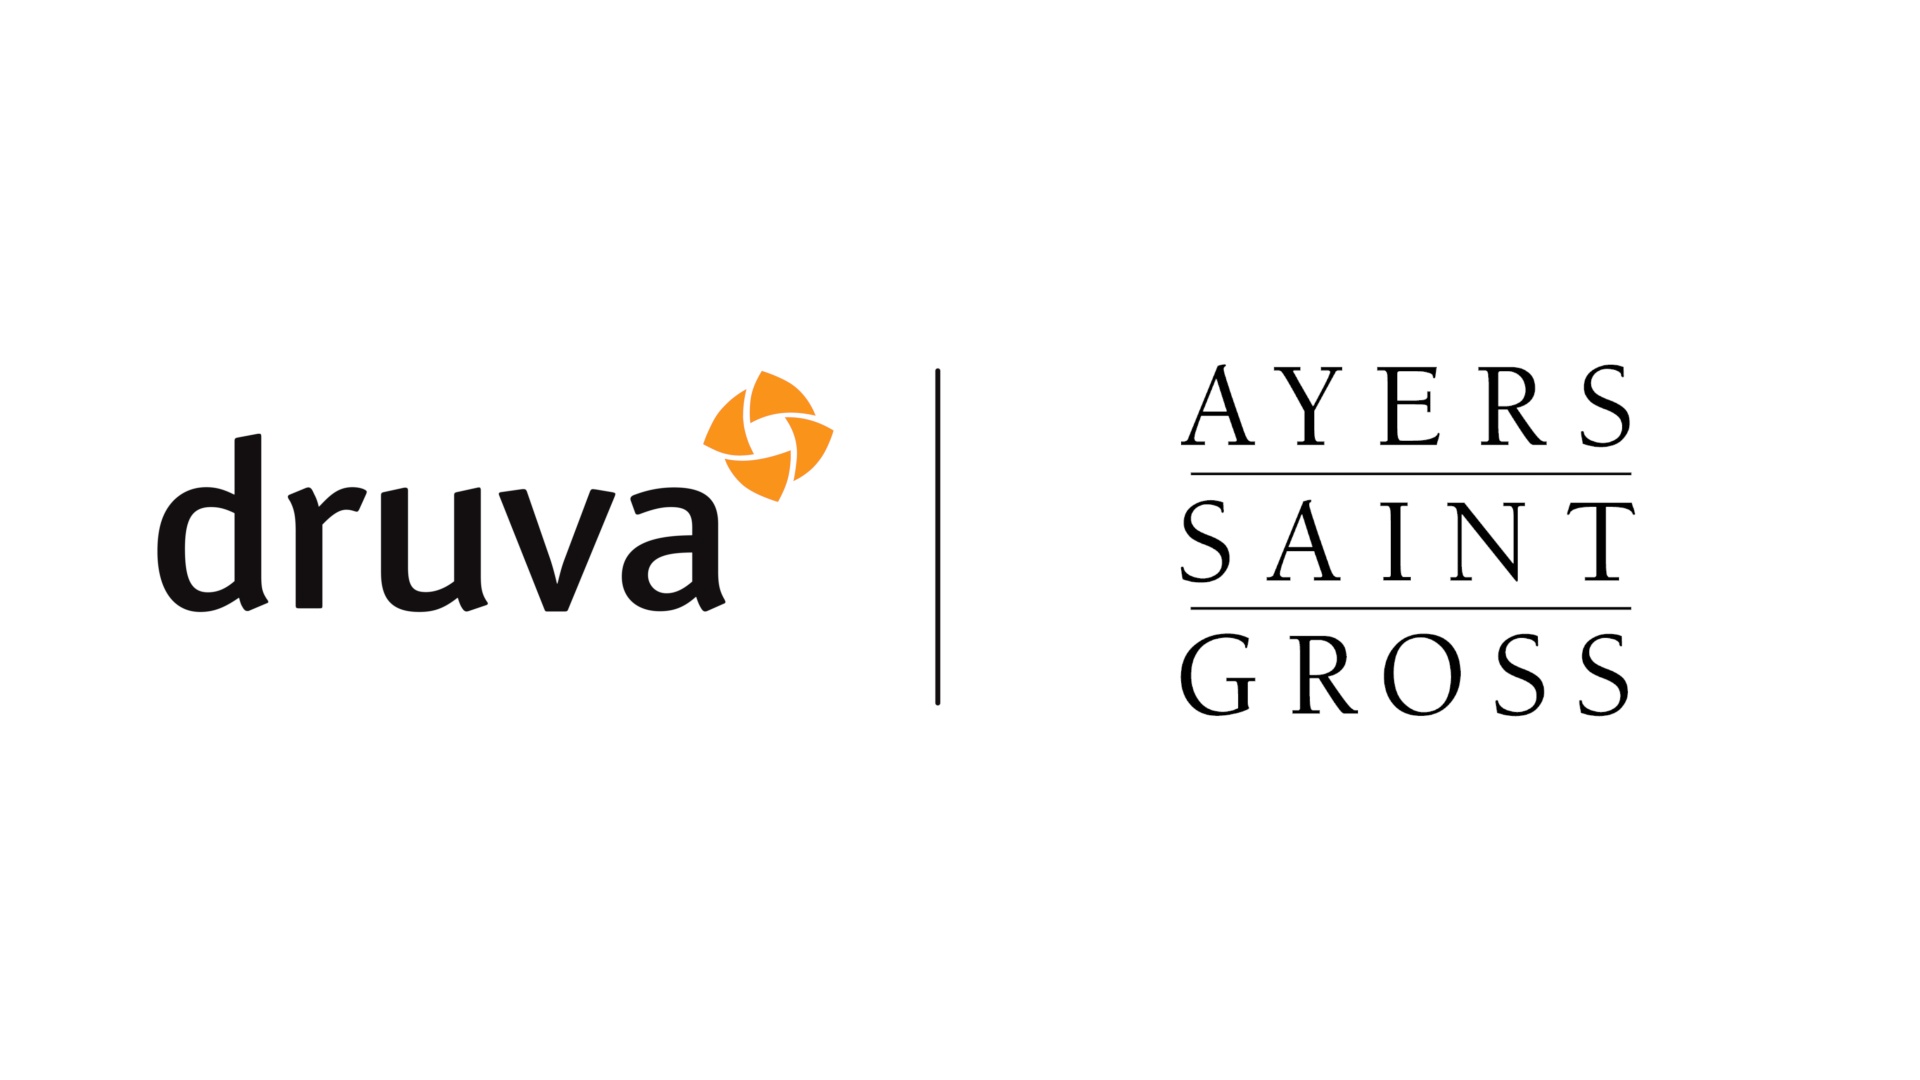 Ayers Saint Gross leverages Druva to enhance their security posture and boost cybersecurity